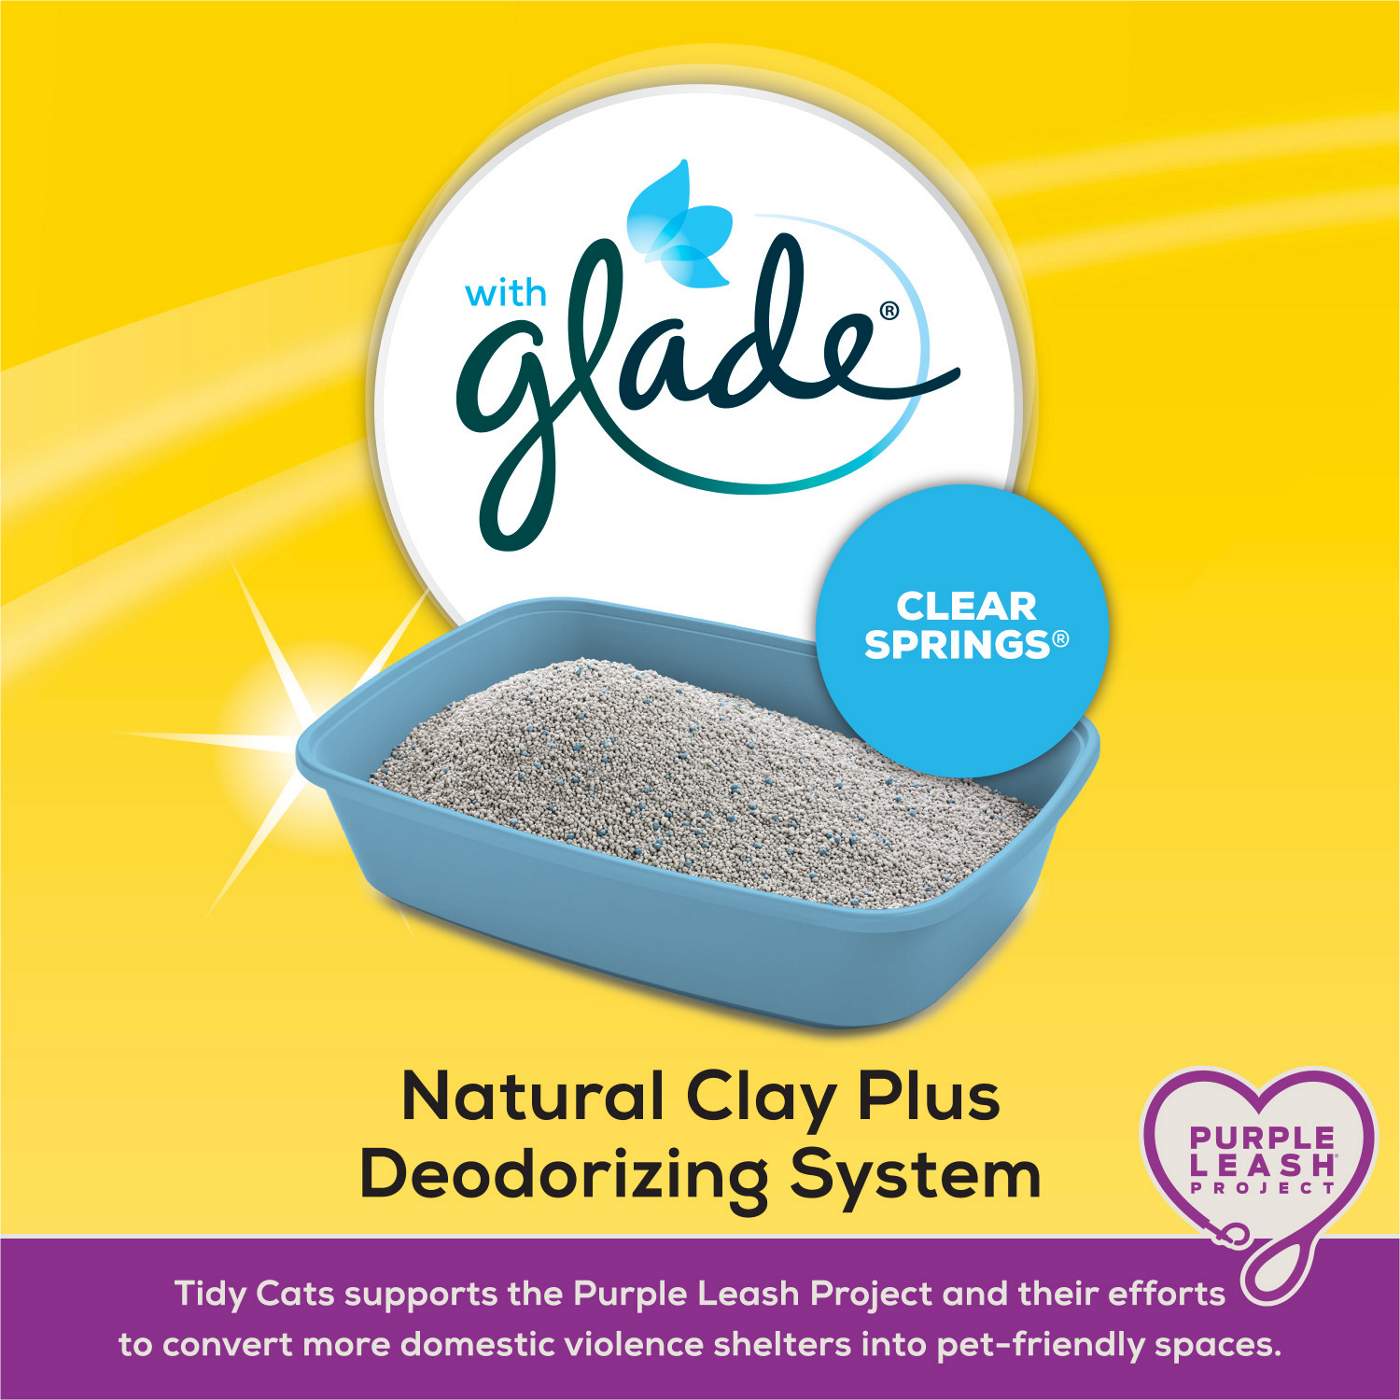 Tidy Cats Purina Tidy Cats Clumping Multi Cat Litter, Glade Clear Springs; image 2 of 3